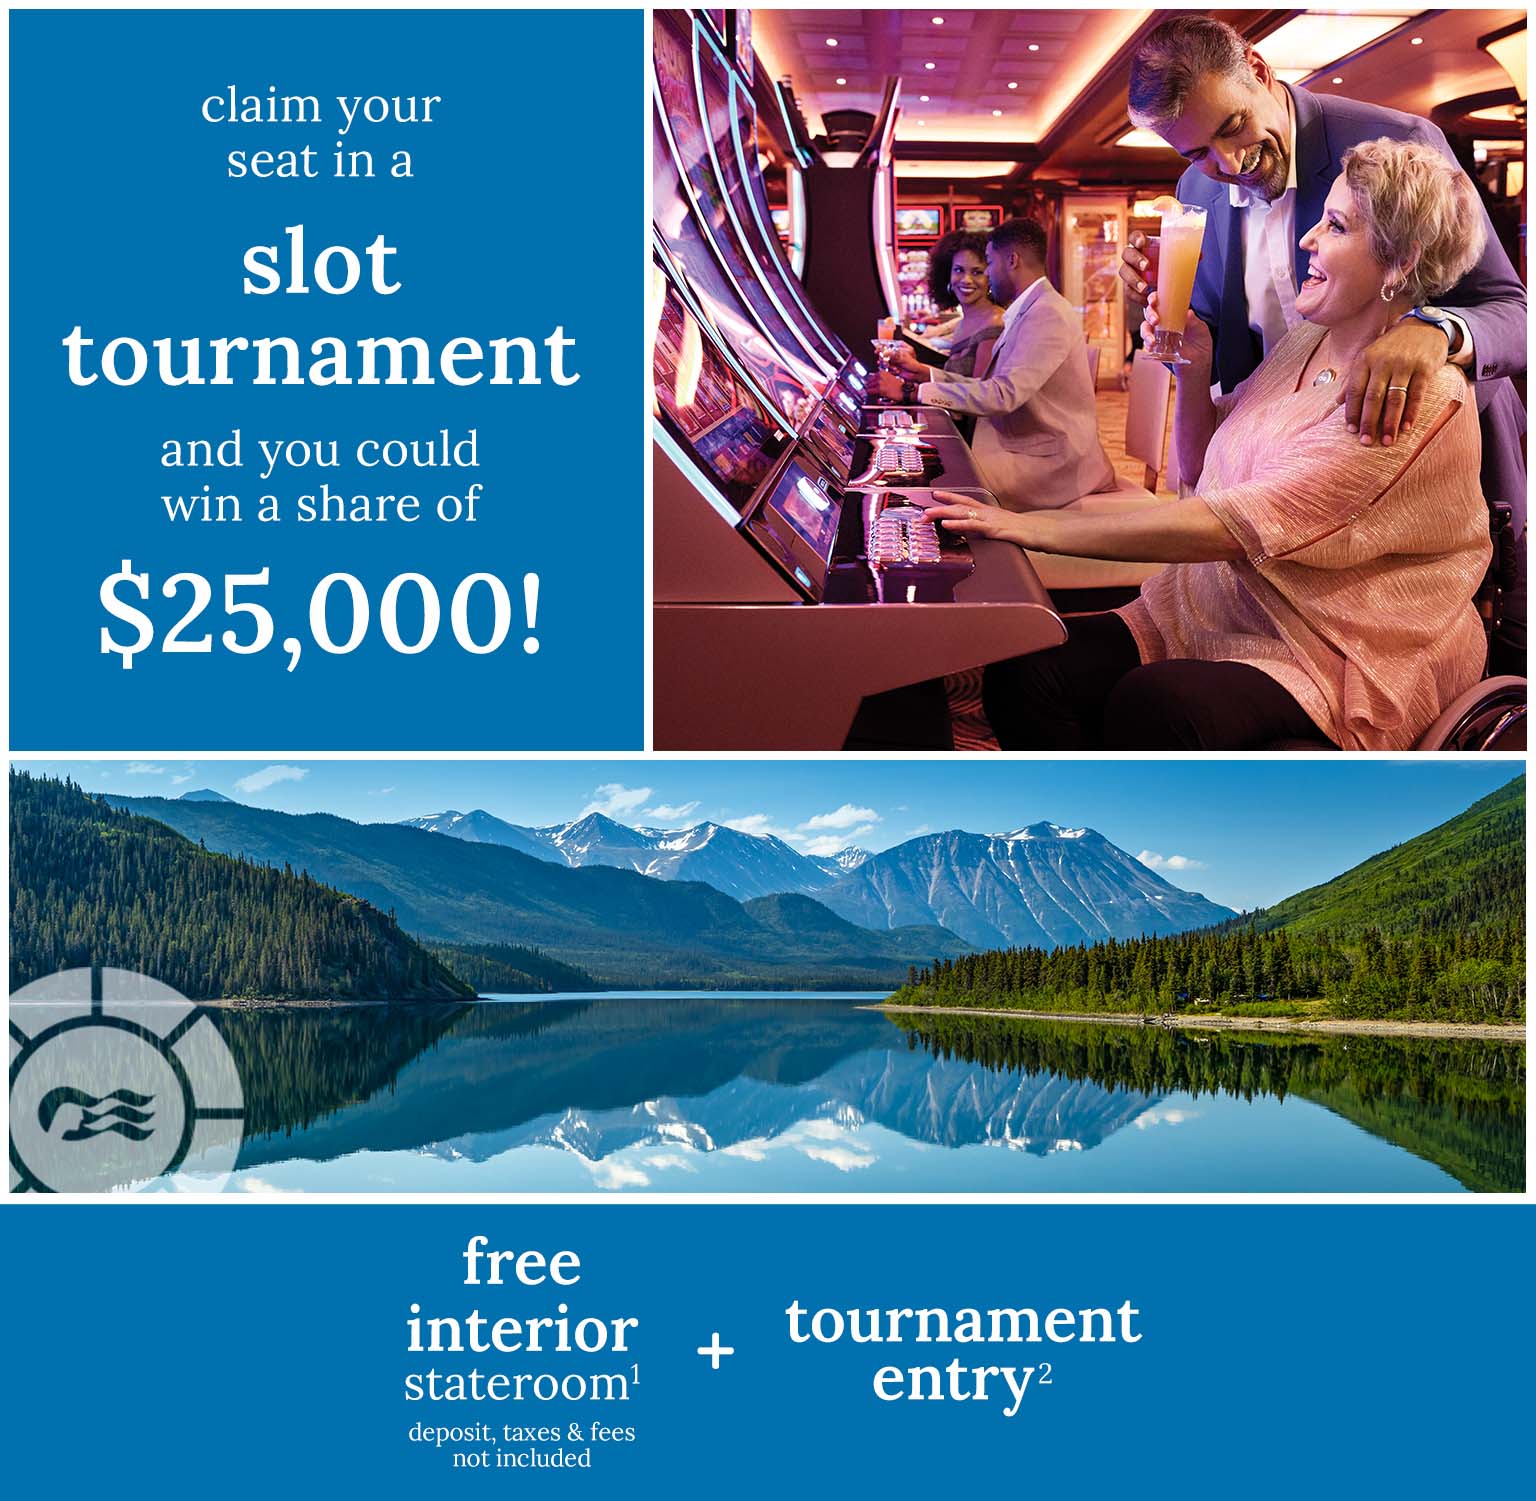 Claim your seat in a slot tournament and you could win a share of $25,000 - free interior stateroom(1) + tournament entry(2)